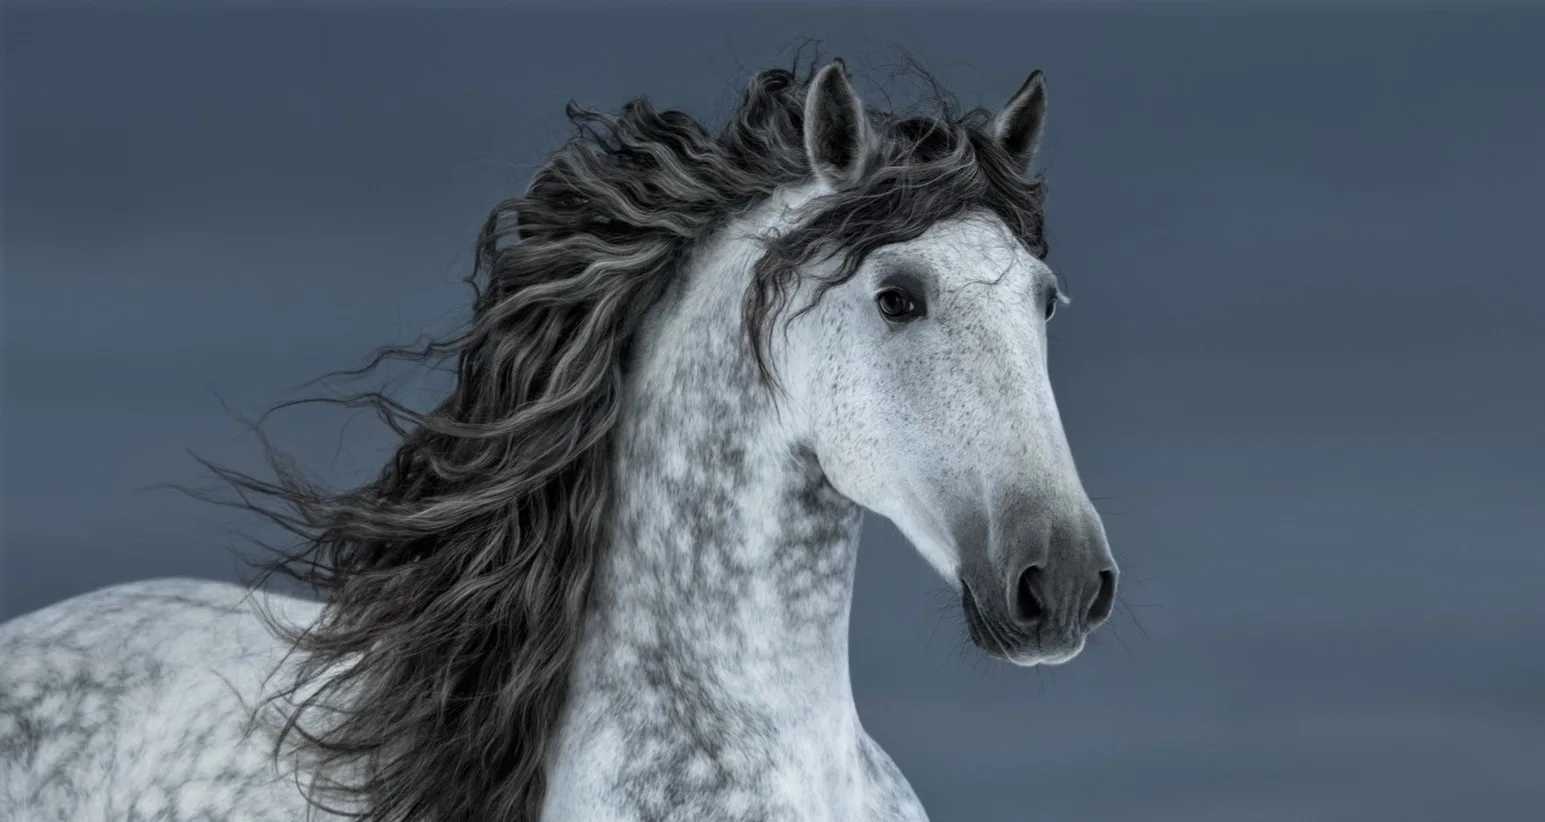 Grey Andalusian horse breed with a long dark mane